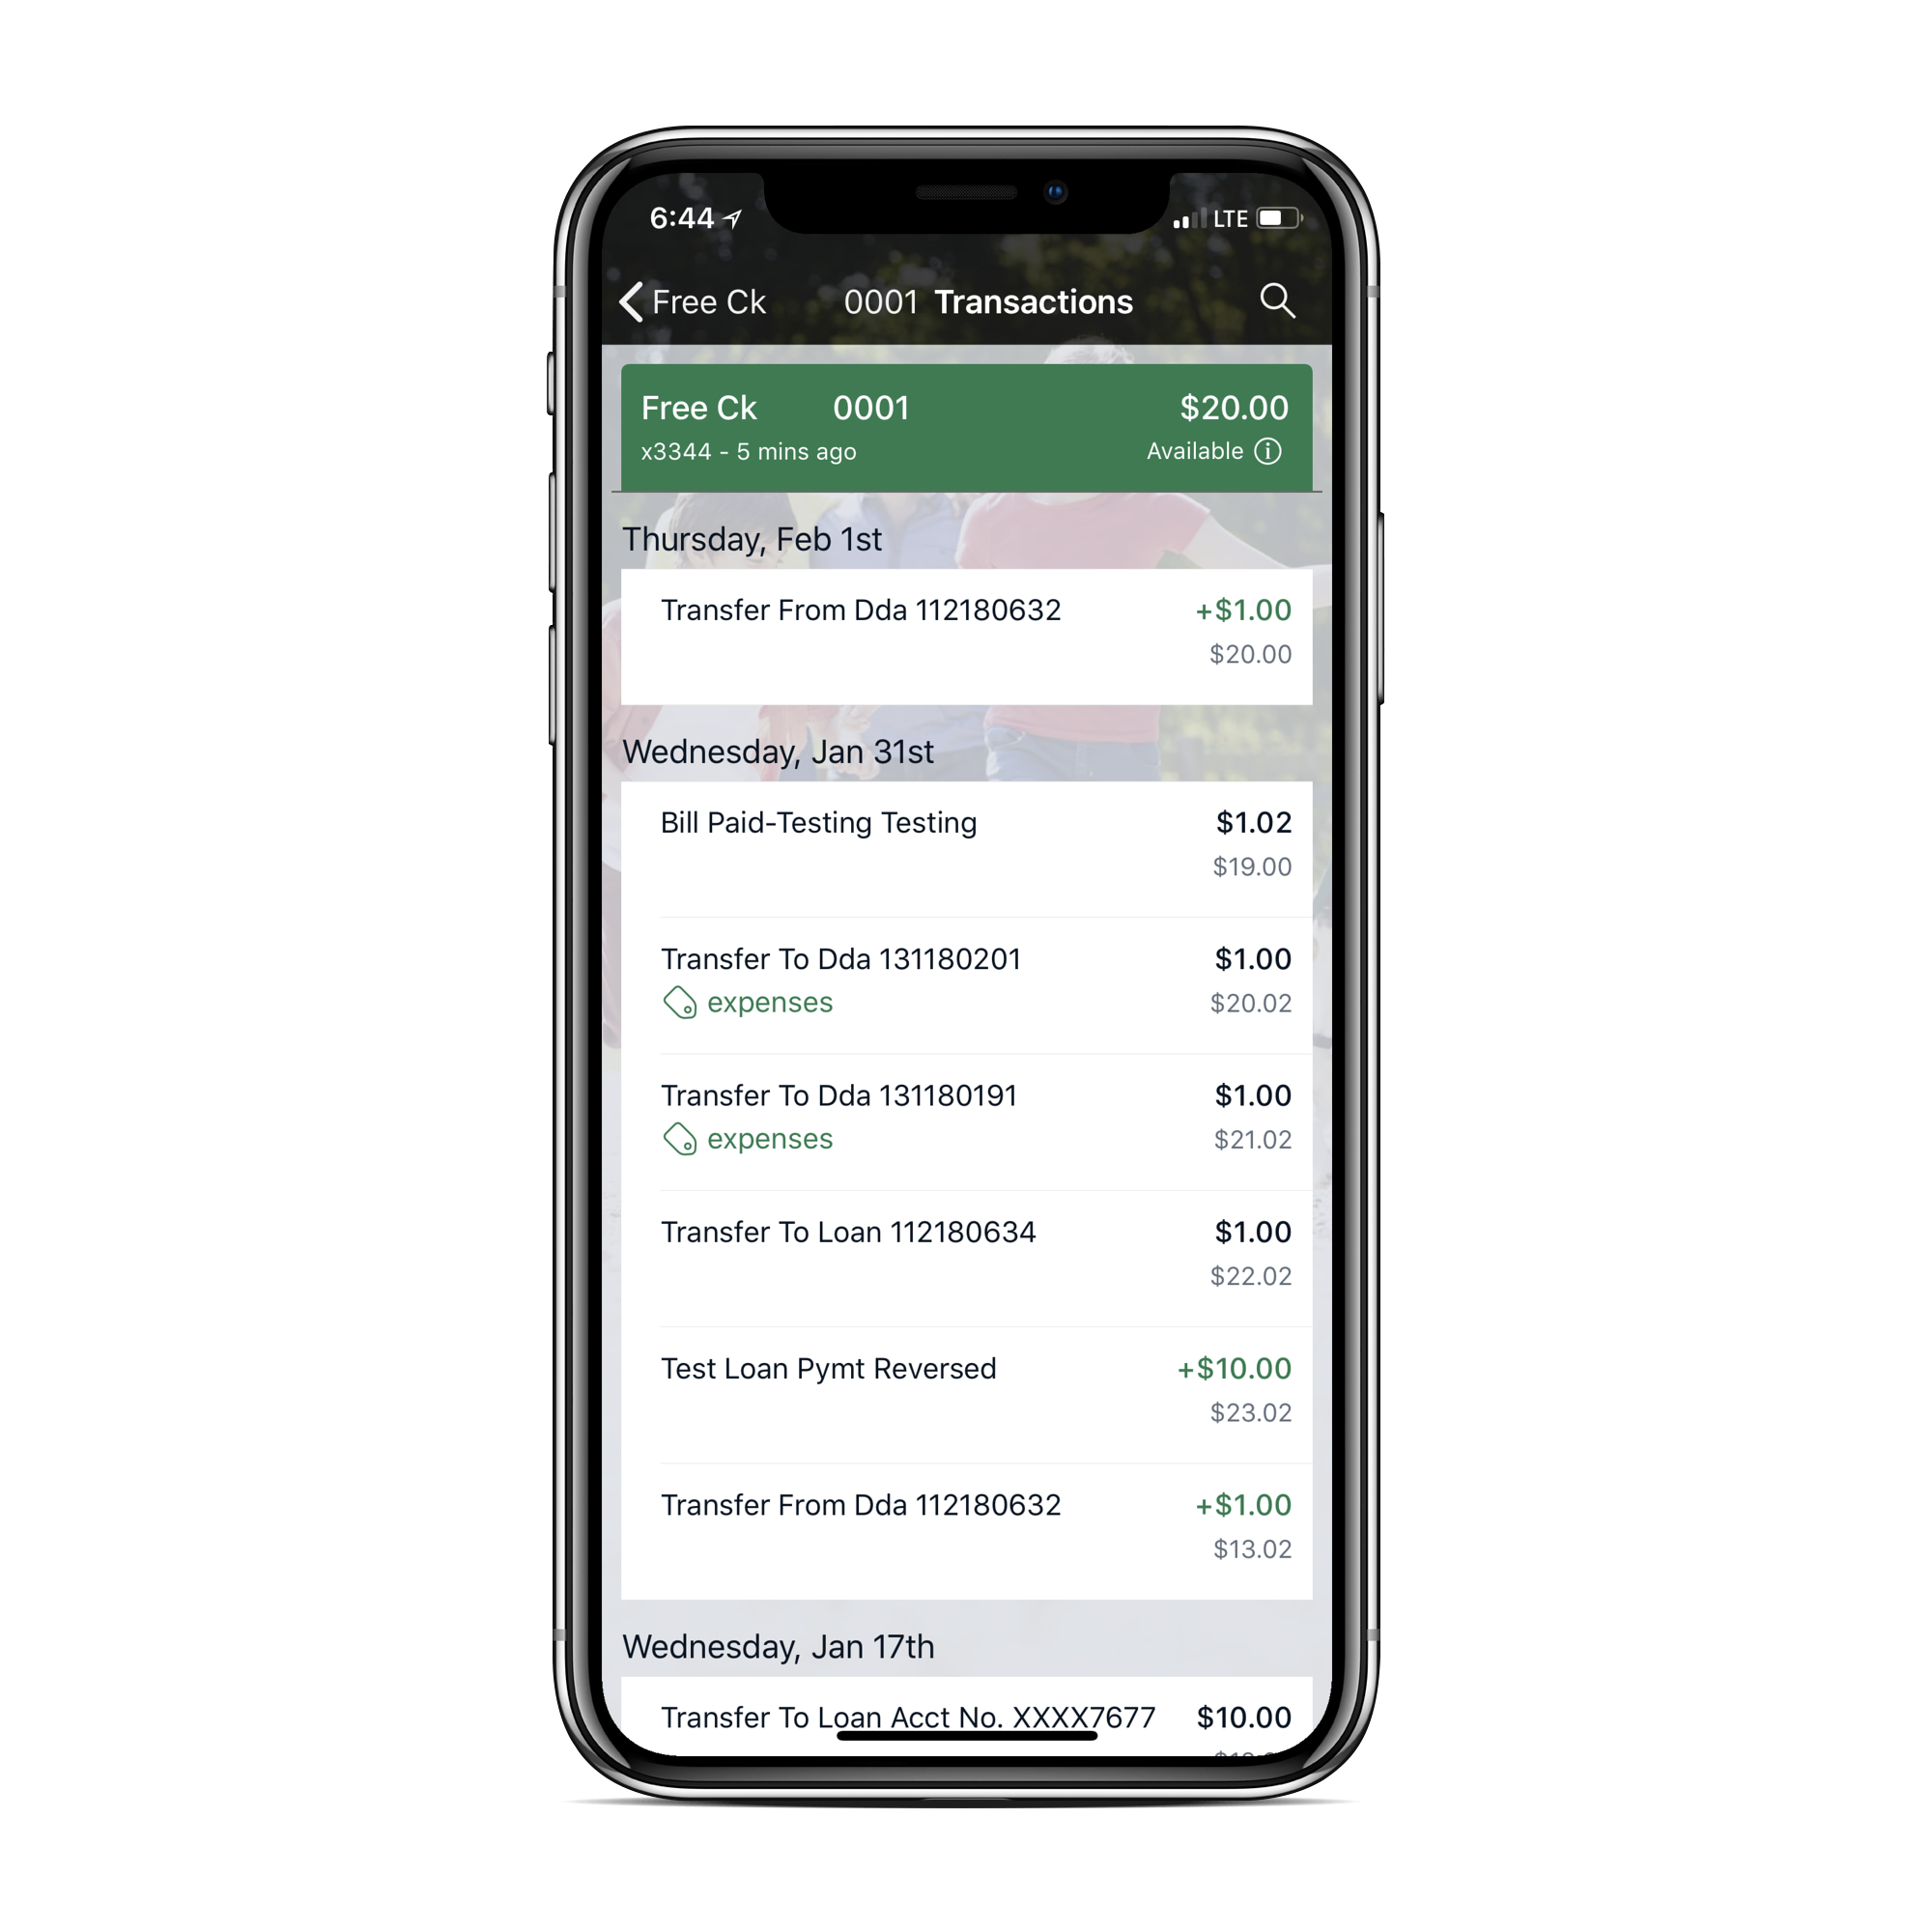 Orrstown Bank mobile banking app transactions screen on space grey iPhone X